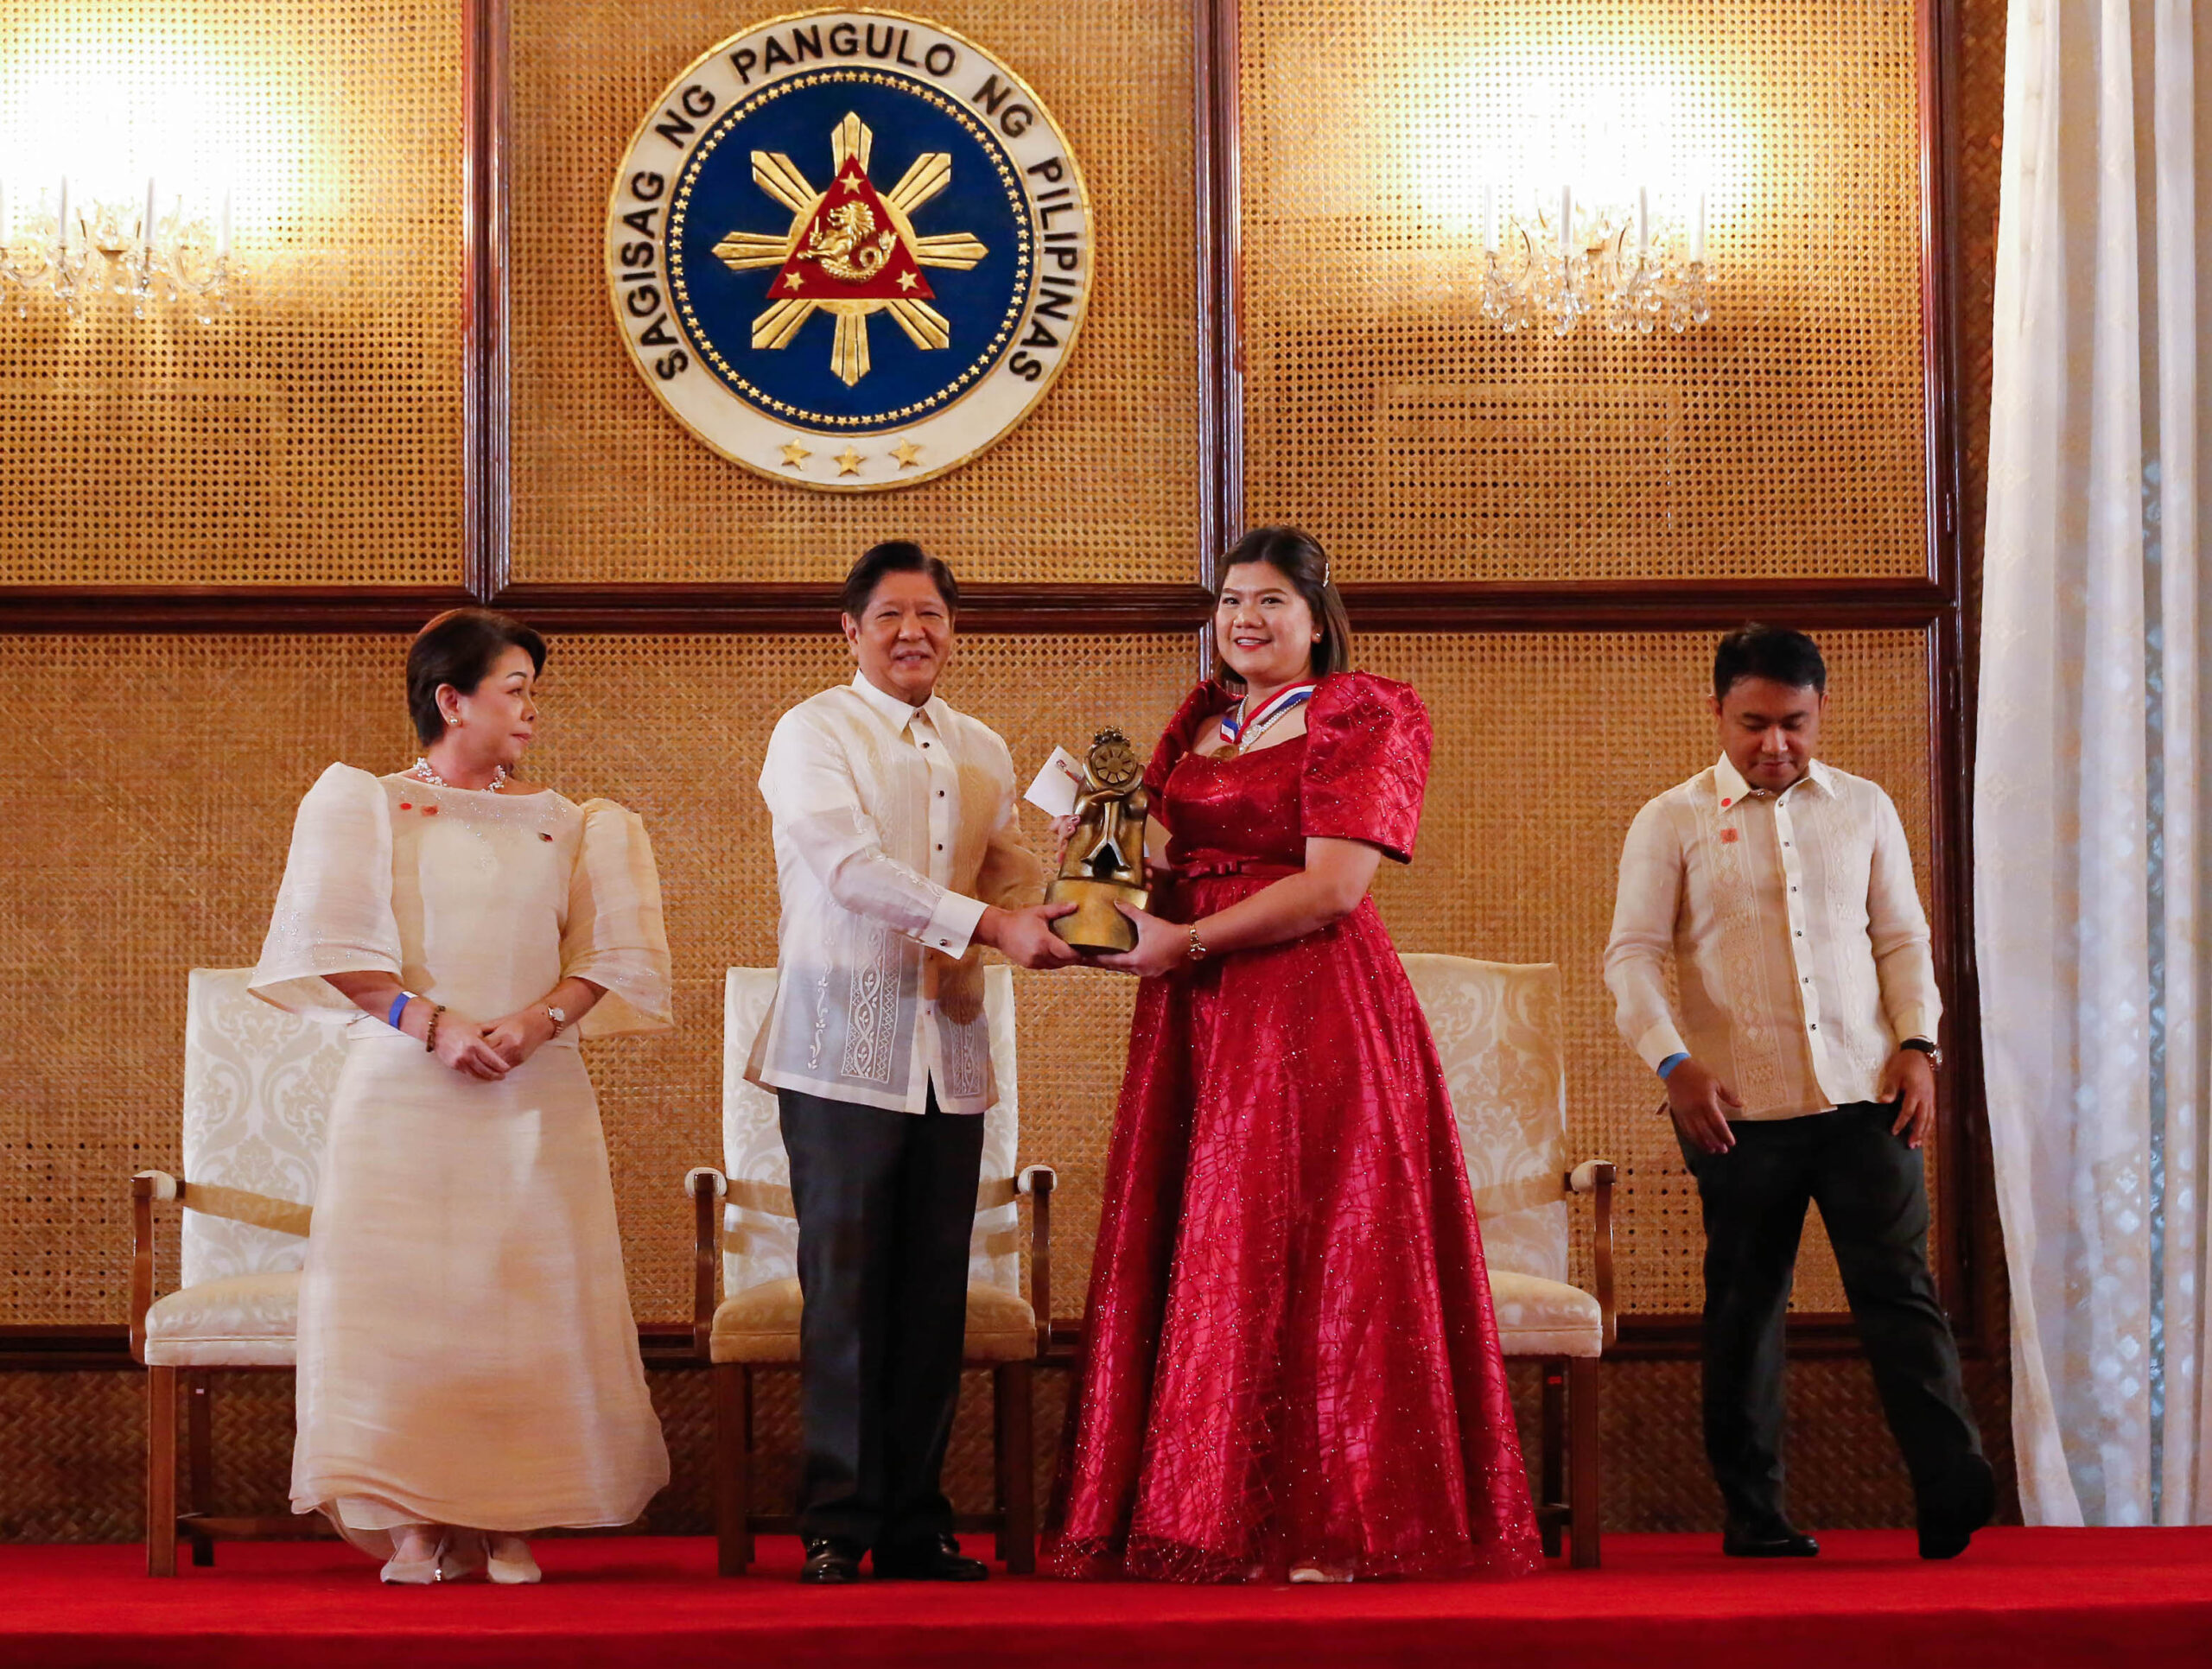 ‘Dangal ng Bayan’: 5 women honored for making a difference in public service